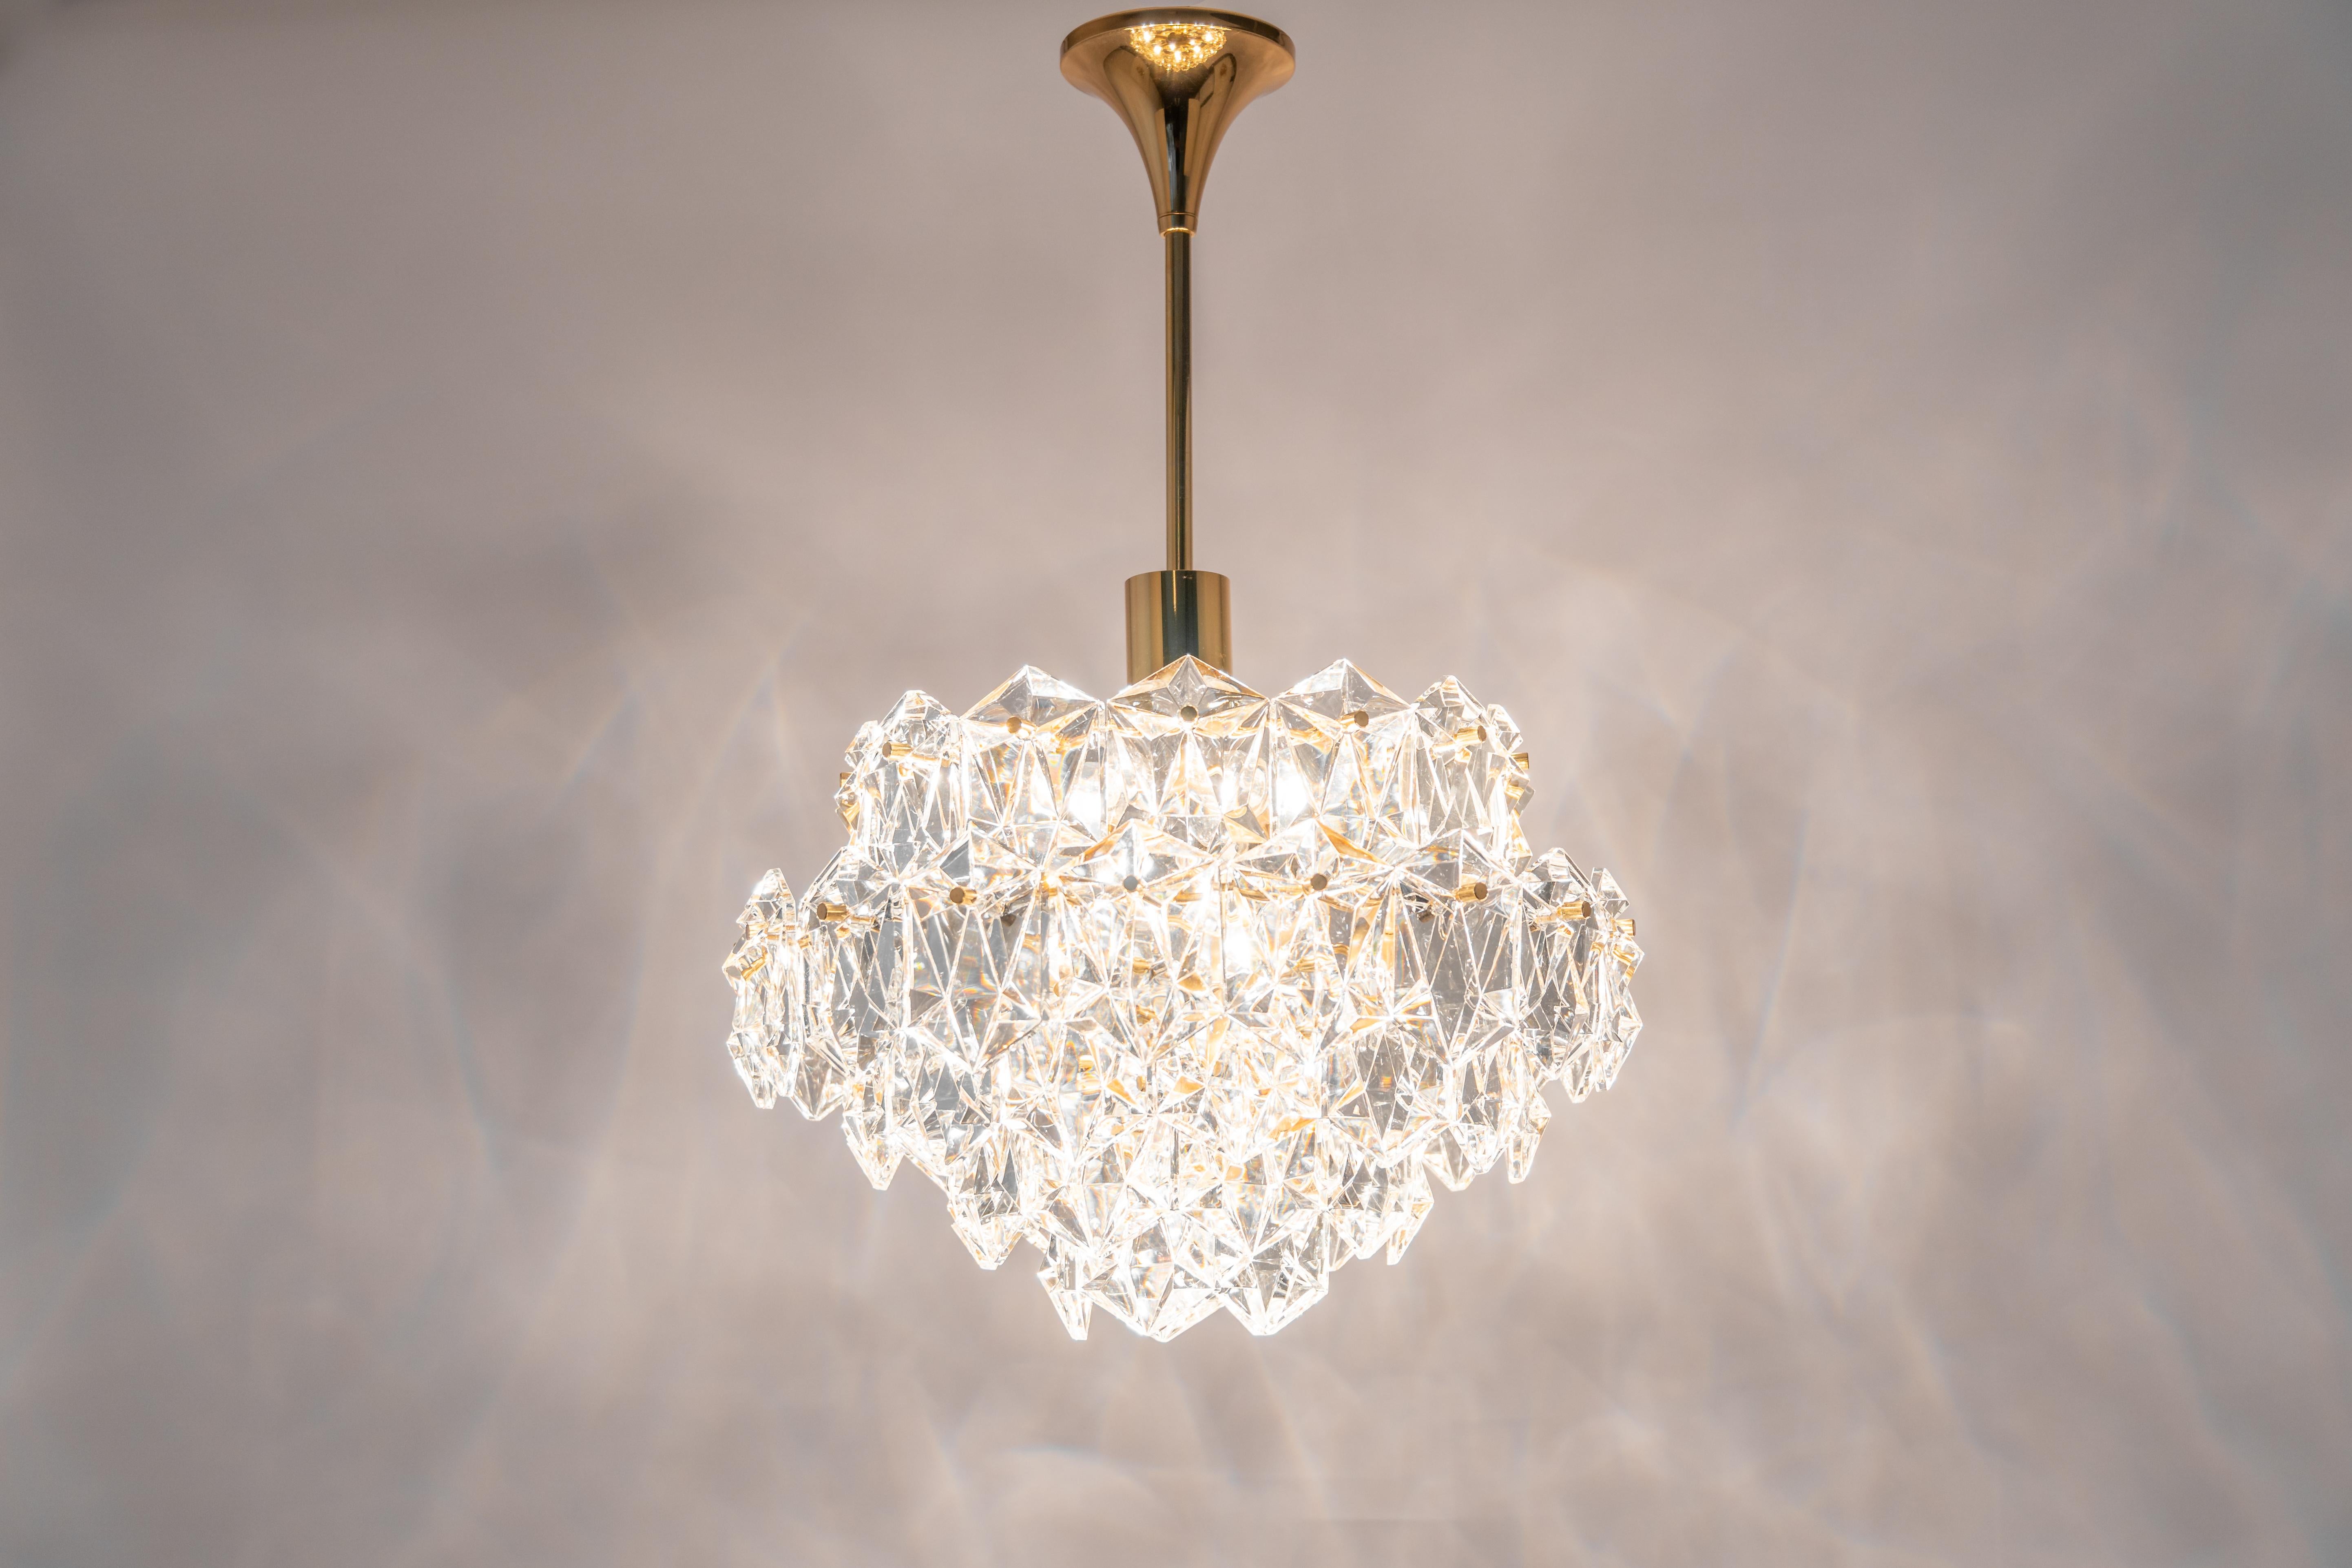 1 of 3 Stunning Chandelier, Brass and Crystal Glass by Kinkeldey, Germany, 1970s For Sale 1